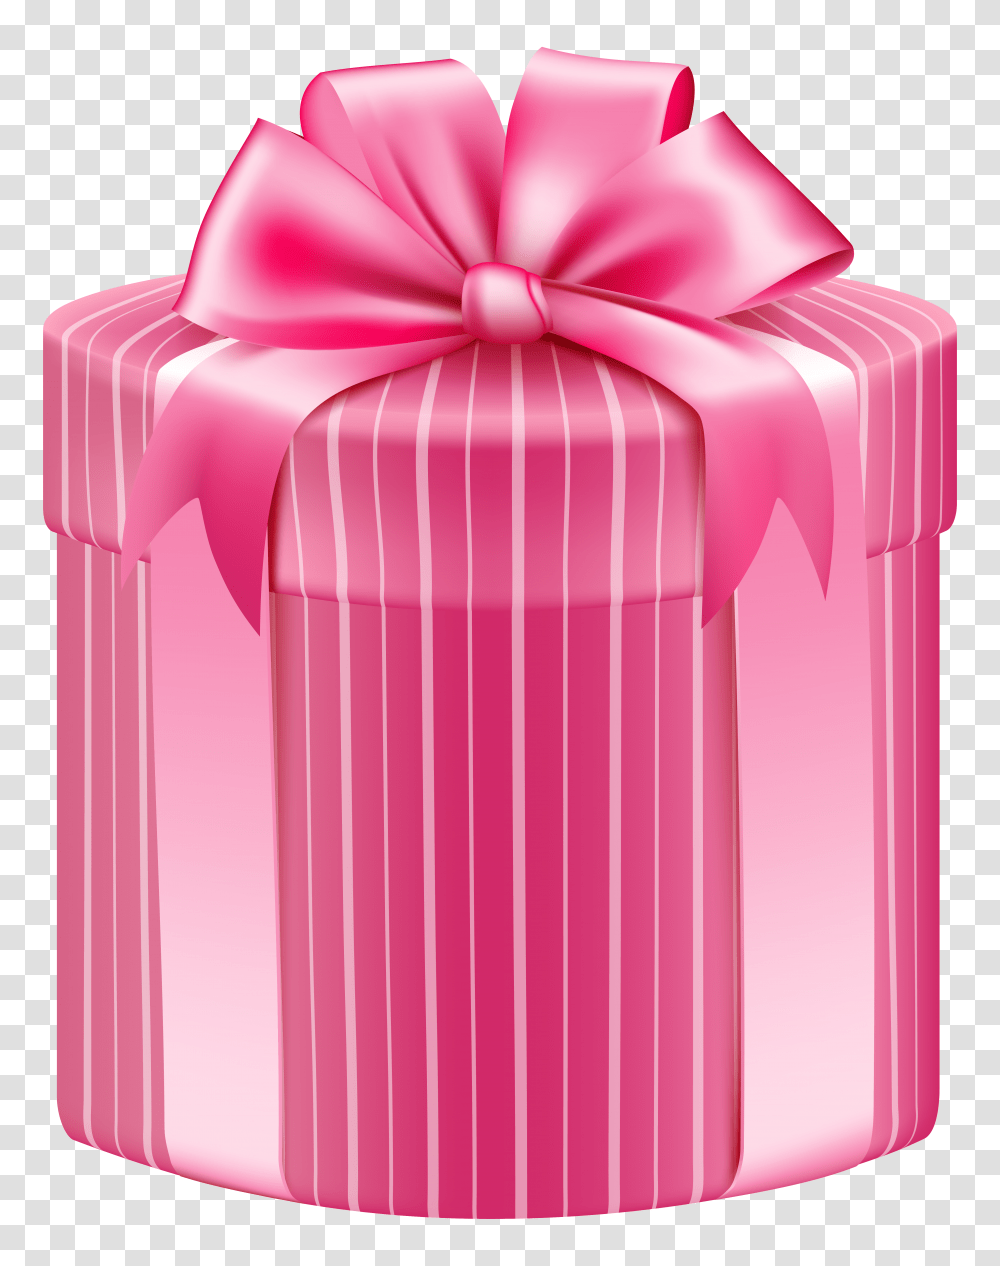 Download Hd Red And Green Christmas Gift Pink Gift Box Pink Gift Box, Mailbox, Letterbox, Chair, Furniture Transparent Png